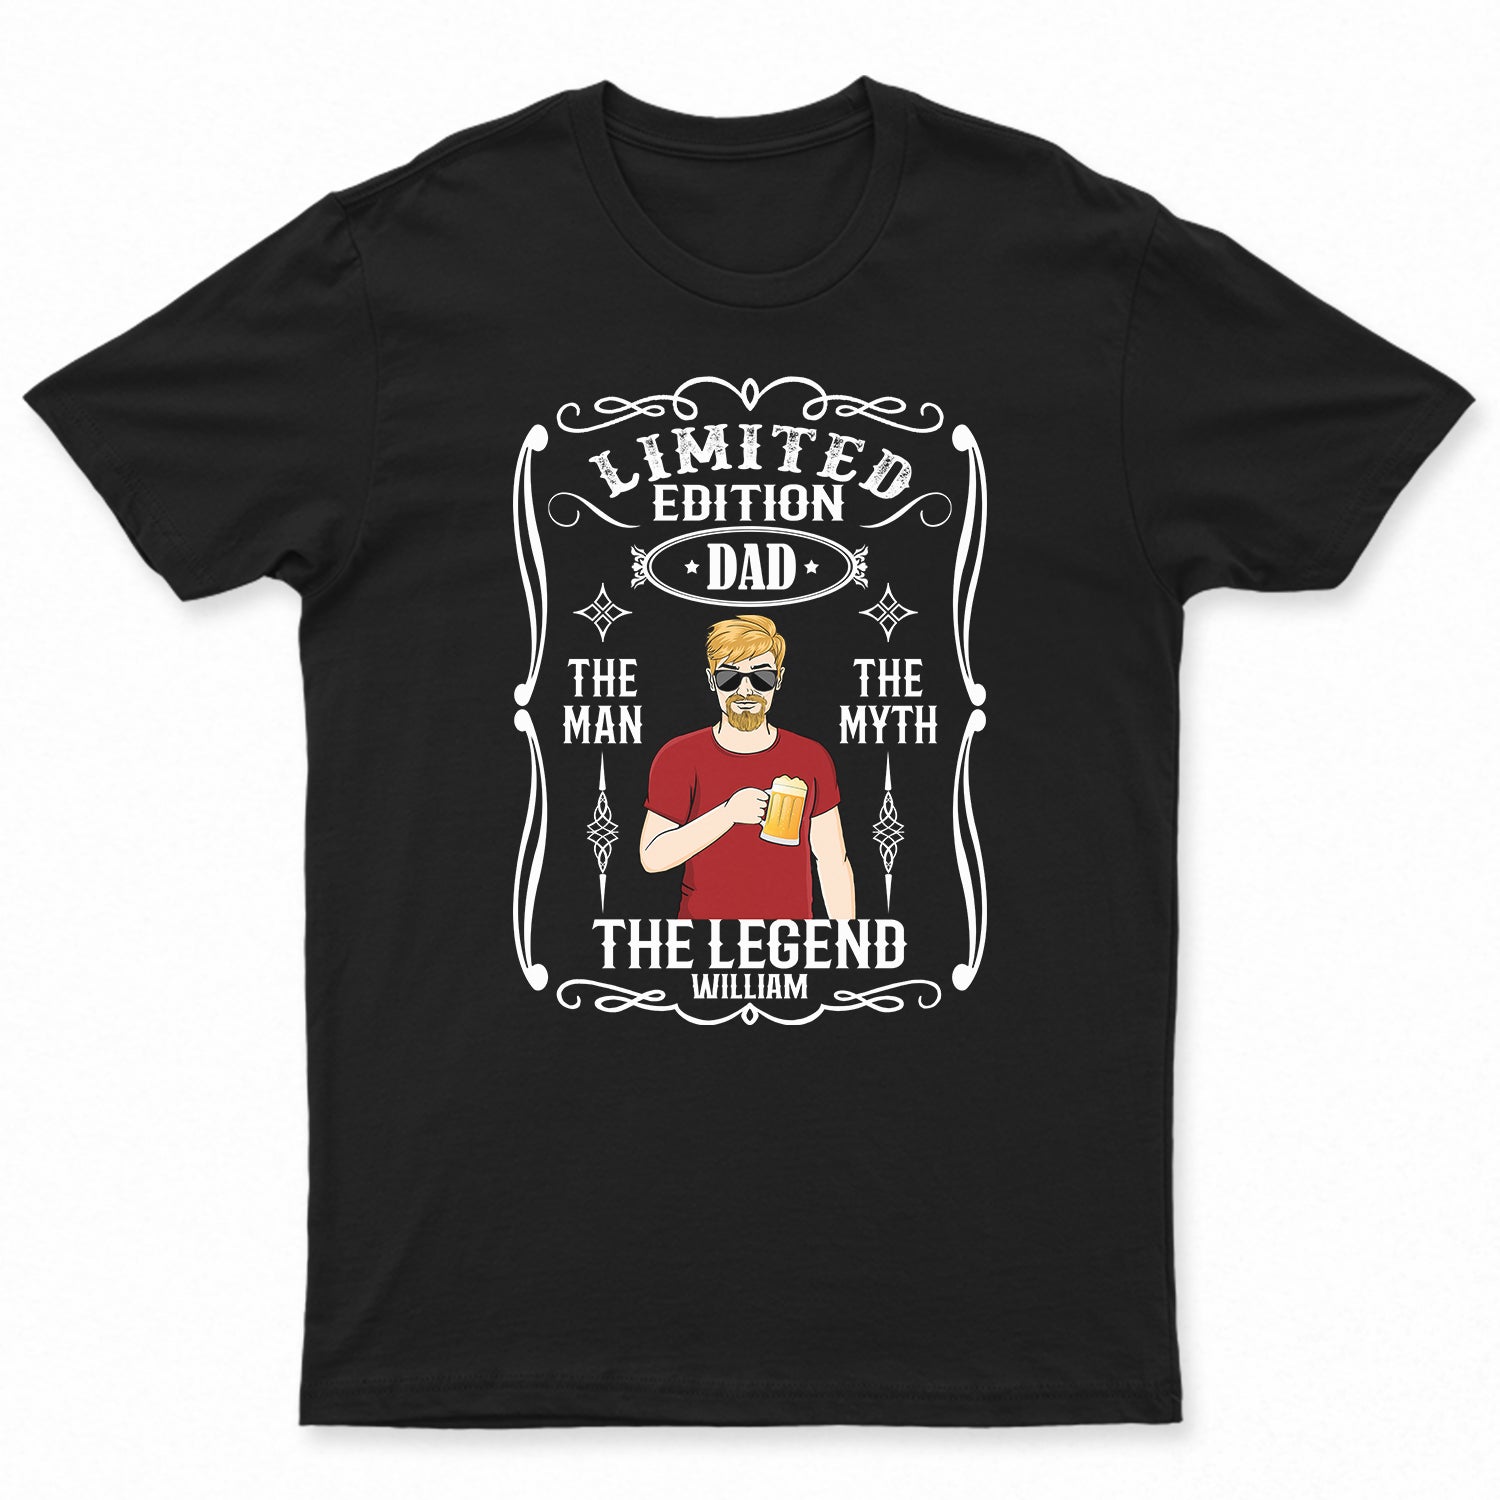 Limited Edition Dad The Man The Myth The Legend - Birthday Gift For Father, Grandpa - Personalized Custom T Shirt